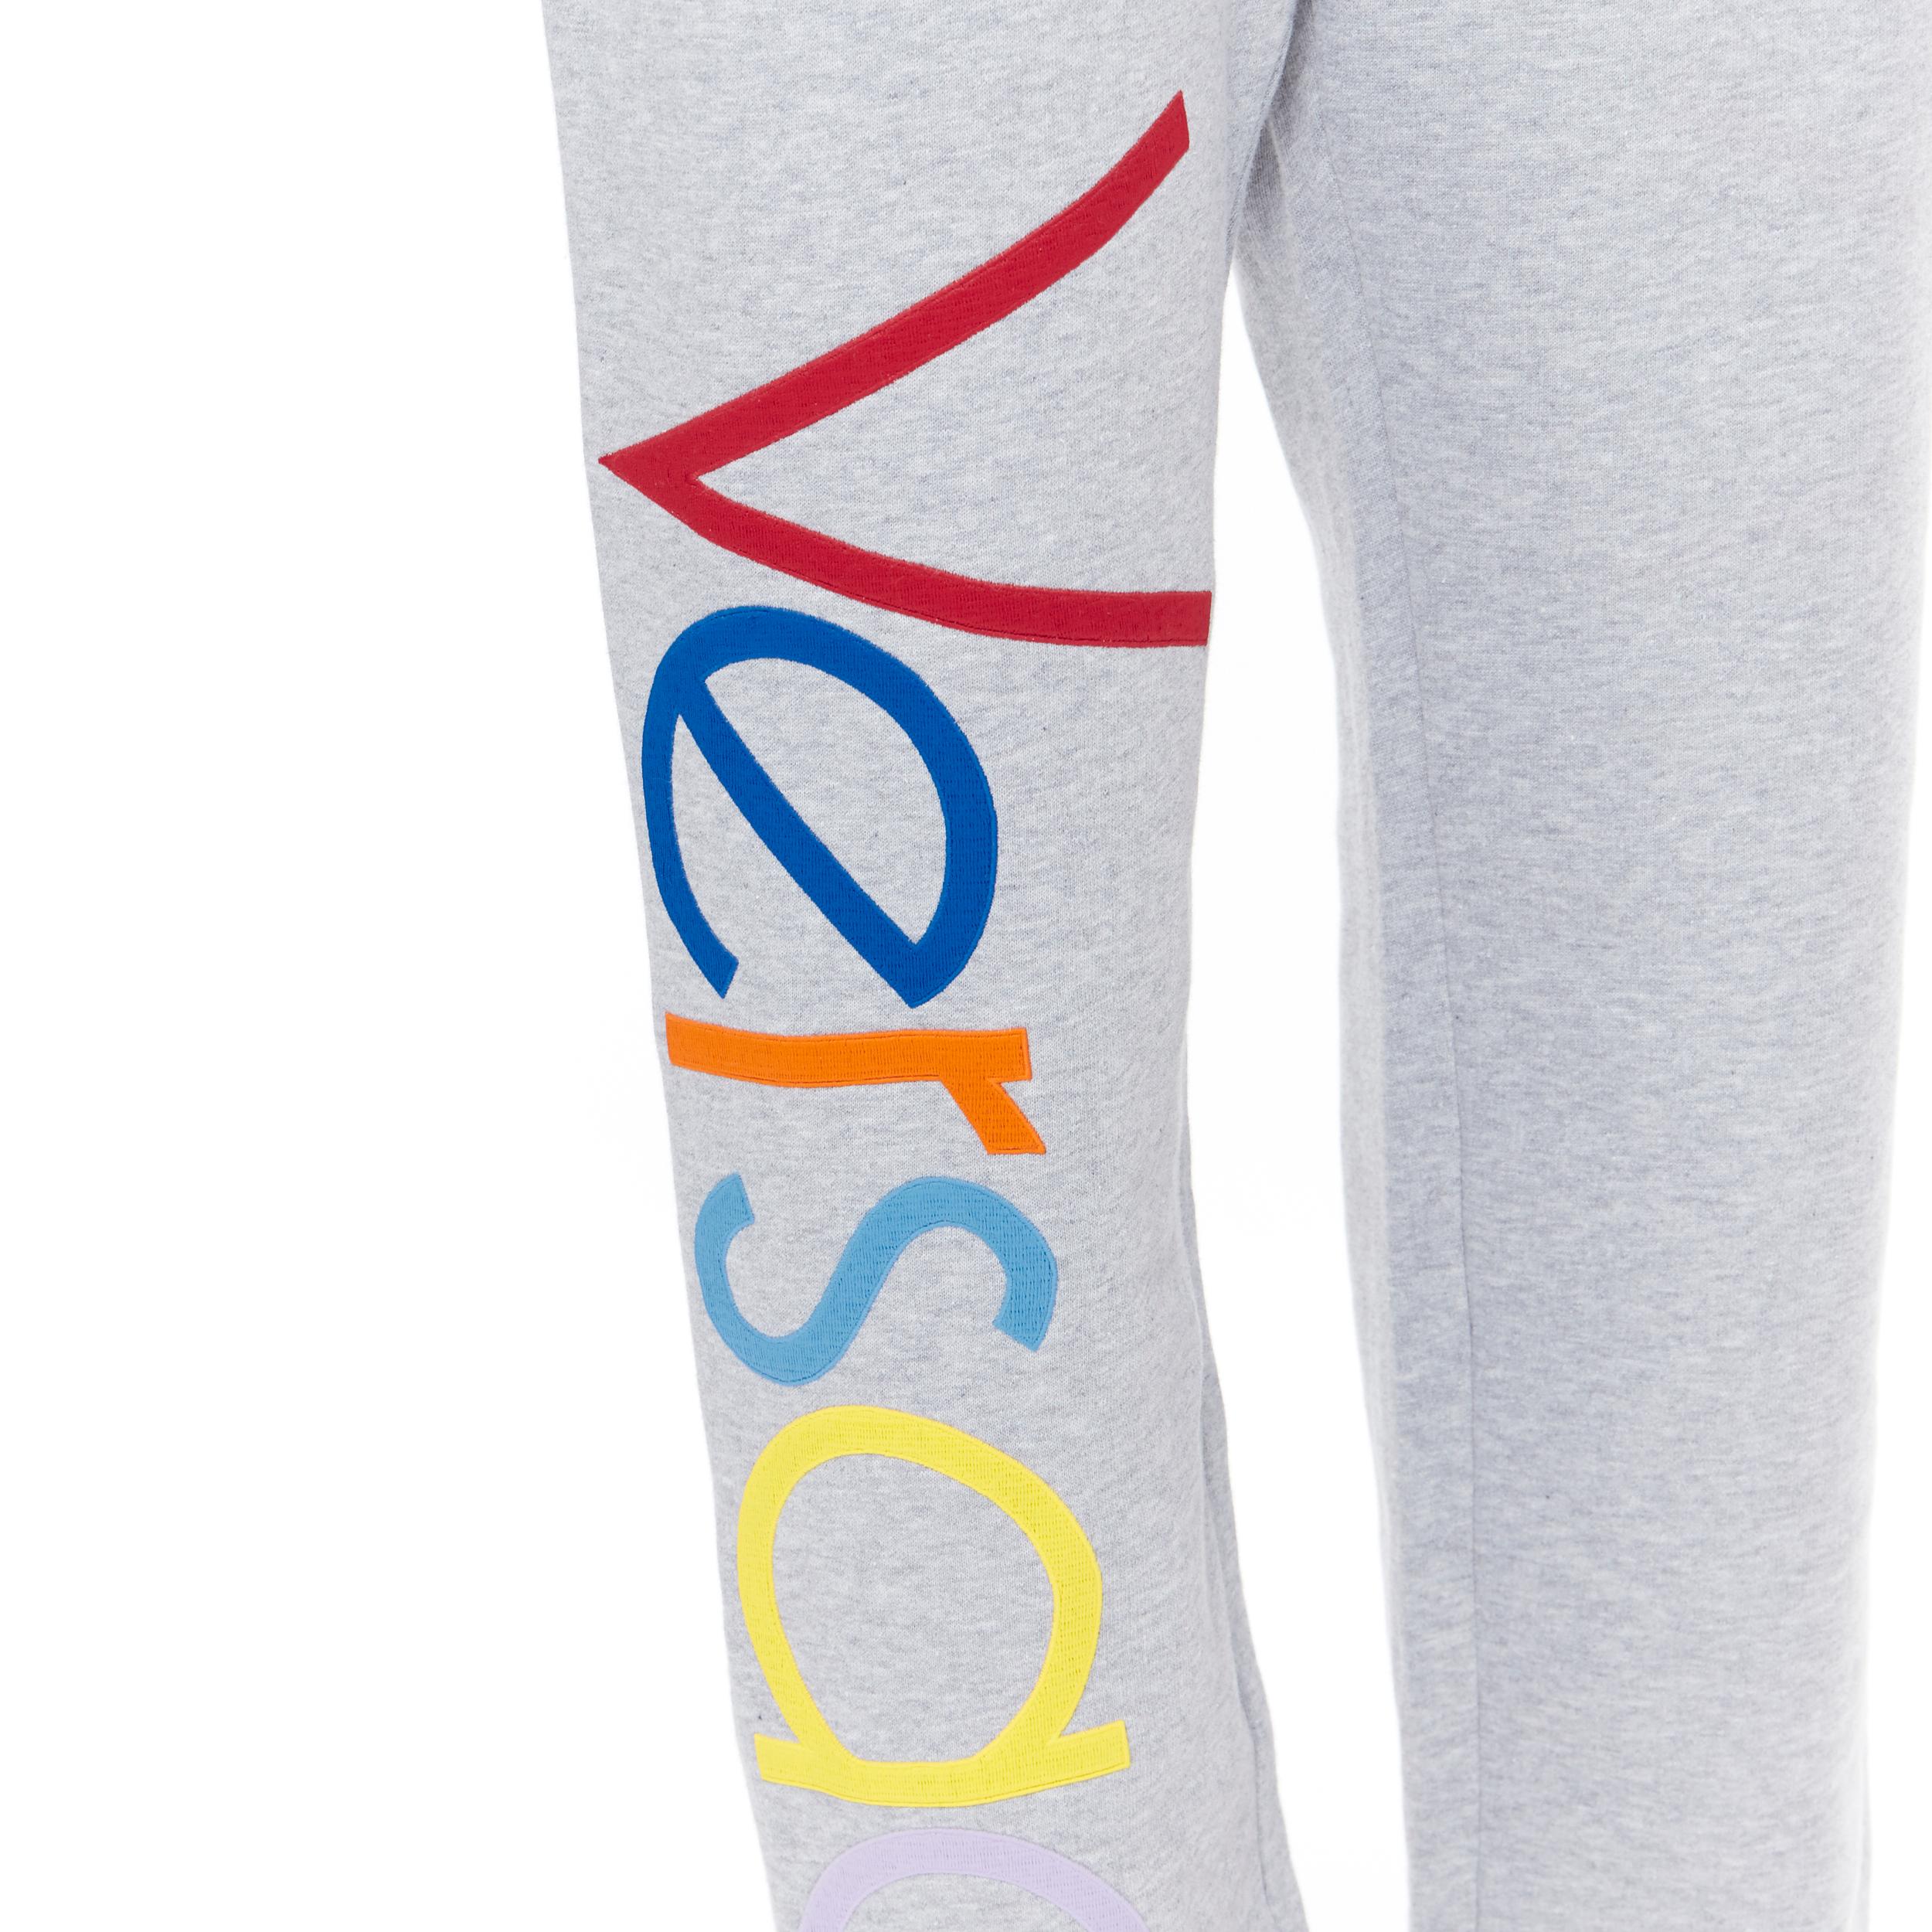 new VERSACE heather grey Vintage 90's logo embroidered jogger sweatpants XXL
Brand: Versace
Designer: Donatella Versace
Model Name / Style: Logo sweatpants
Material: Cotton
Color: Grey
Pattern: Solid
Closure: Drawstring
Extra Detail: Drawstring